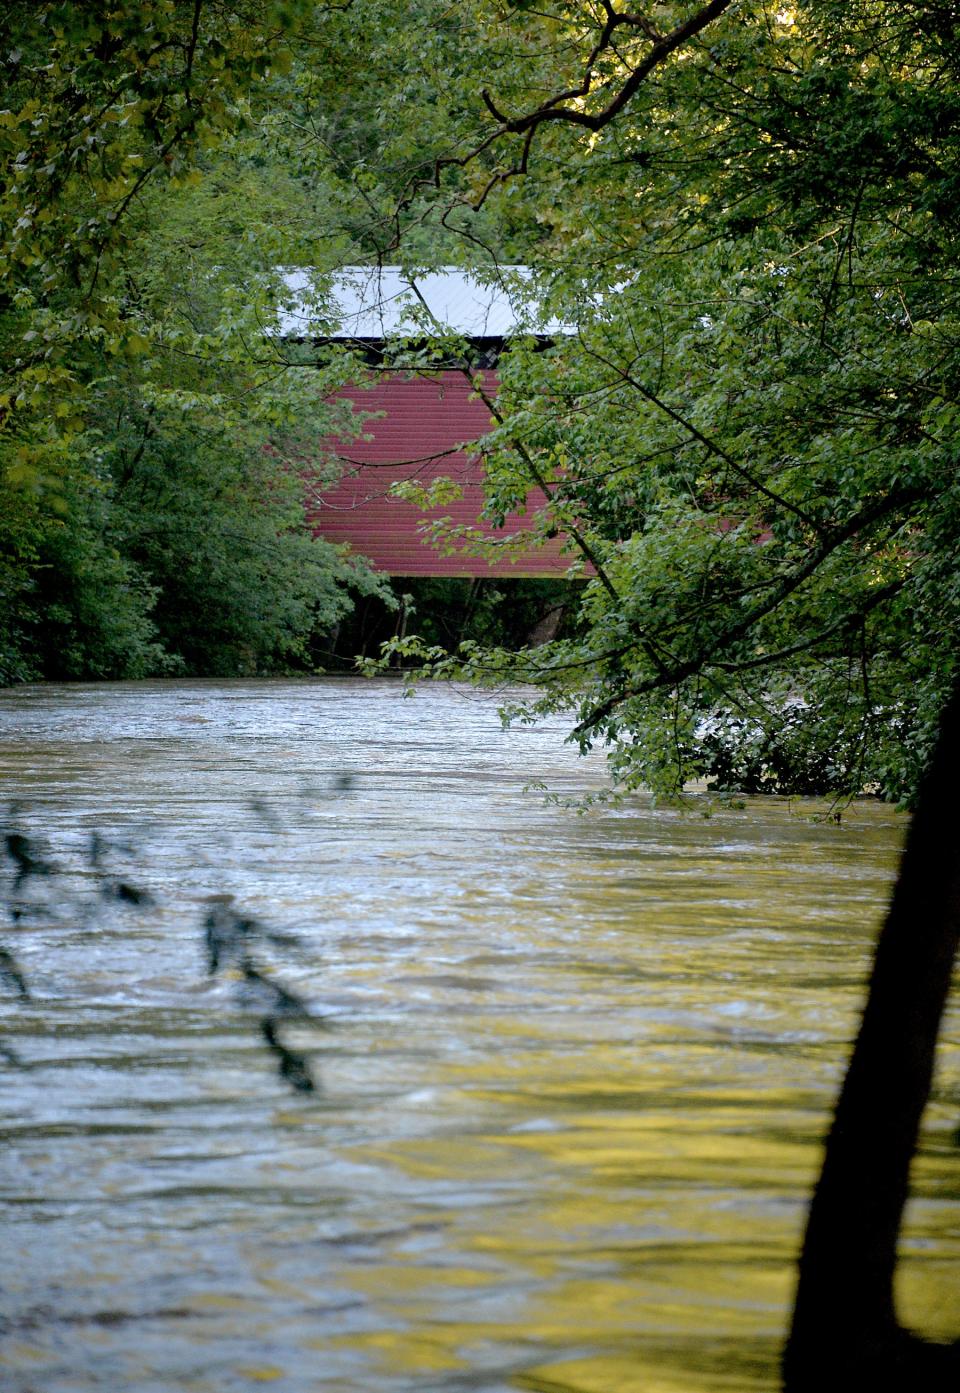 The Greencastle-Antrim area received nearly 4.5 inches of rain from Hurricane Ida on Sept. 1, 2021, and the east branch of the Conococheague Creek was high under Martin's Mill Bridge in Antrim Township and spilled across the adjacent park, but didn’t cause any damage. If Hurricane Ian brings 2 inches of rain to the region, it’s possible the road to the park will flood and the park will be closed for a couple of days early next week.